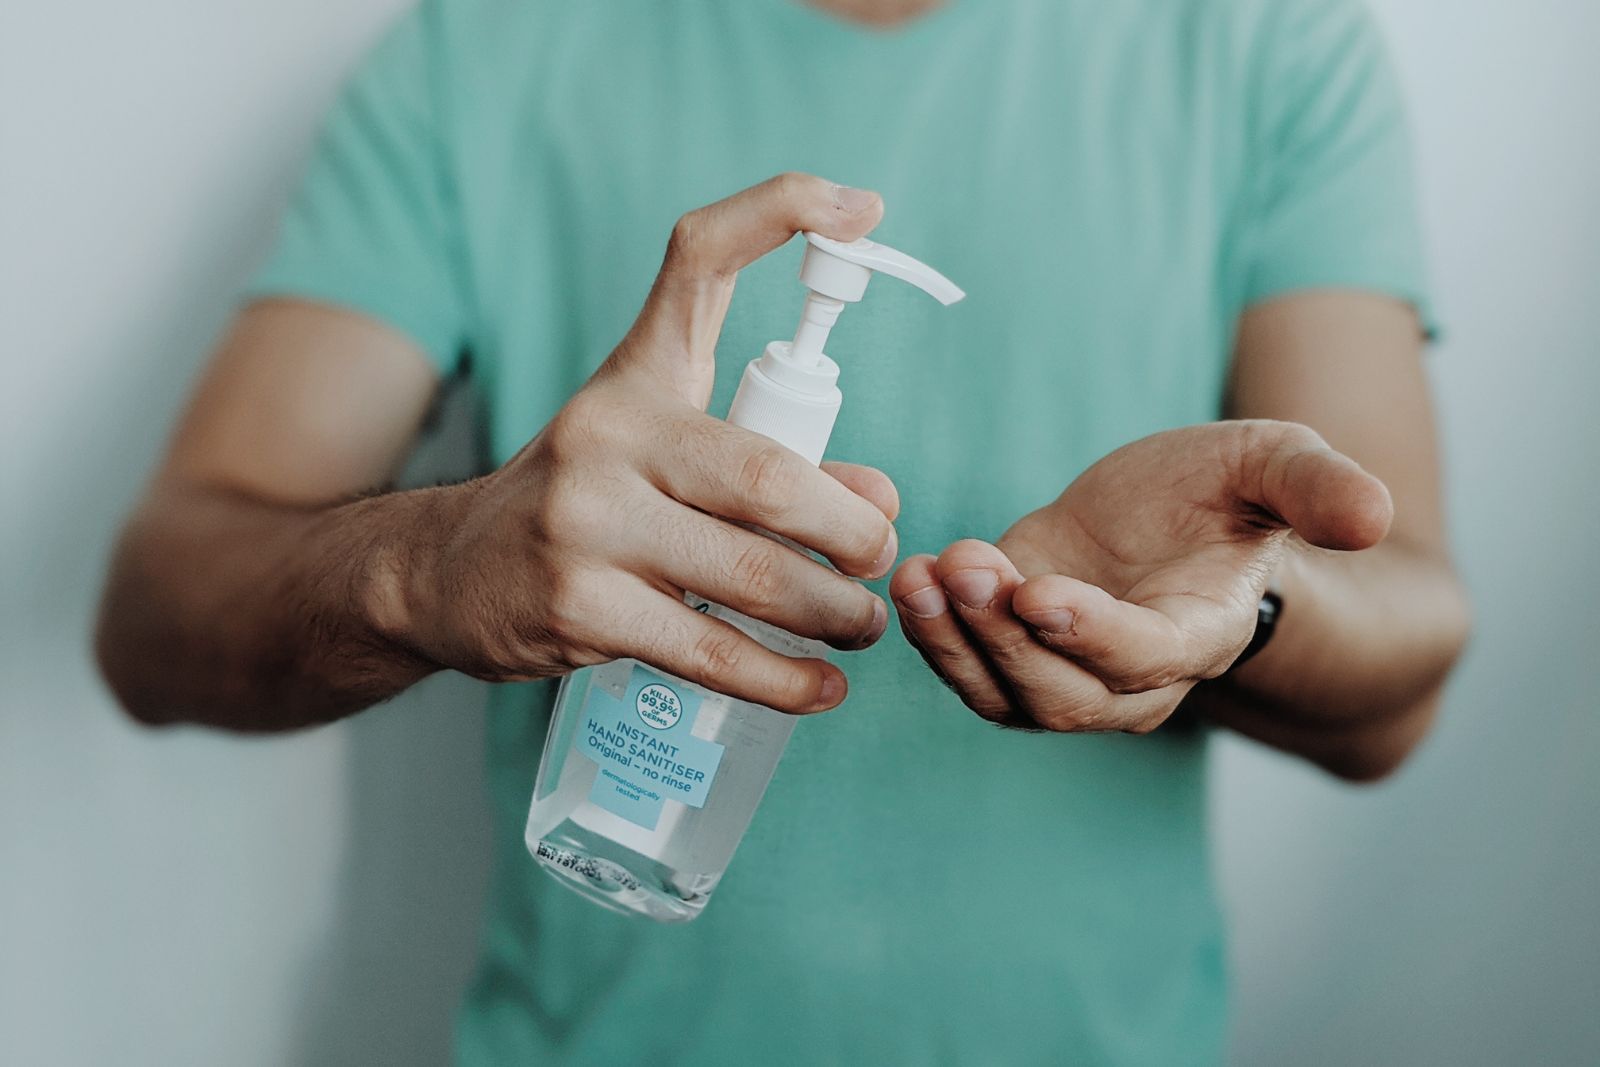 Not all Hand Sanitizer is the Same